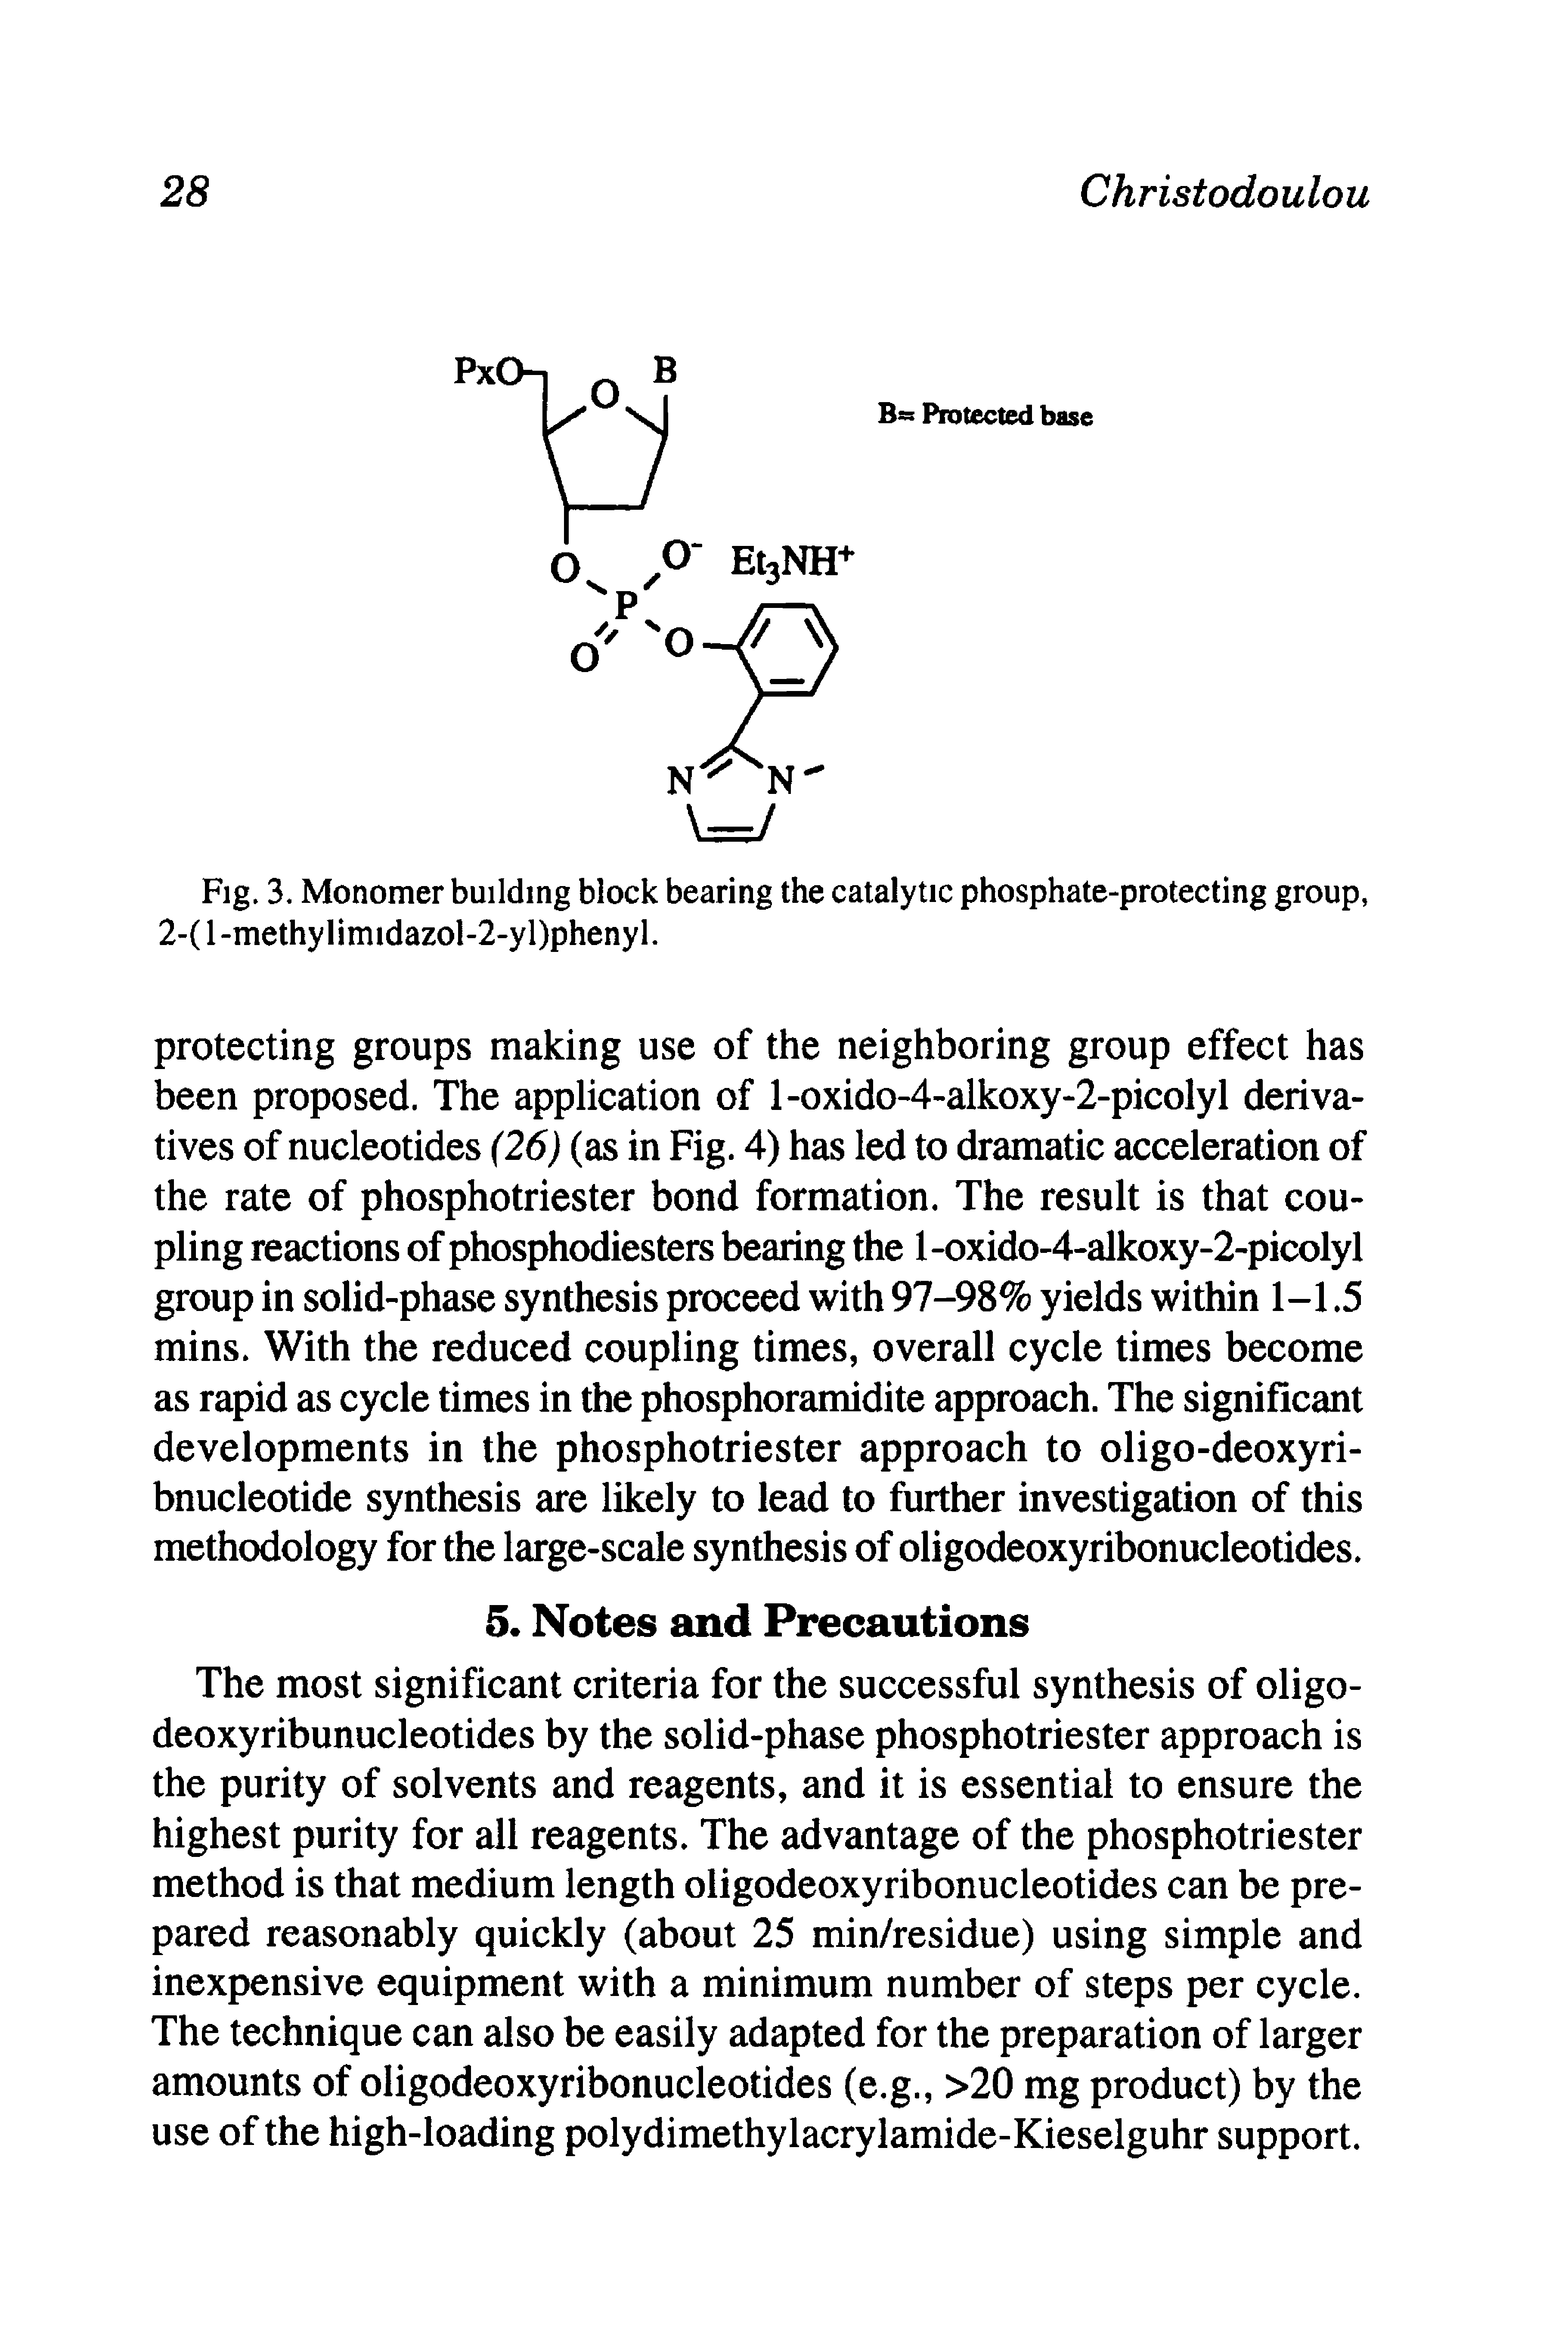 Fig. 3. Monomer building block bearing the catalytic phosphate-protecting group, 2-(l-methylimidazol-2-yl)phenyl.